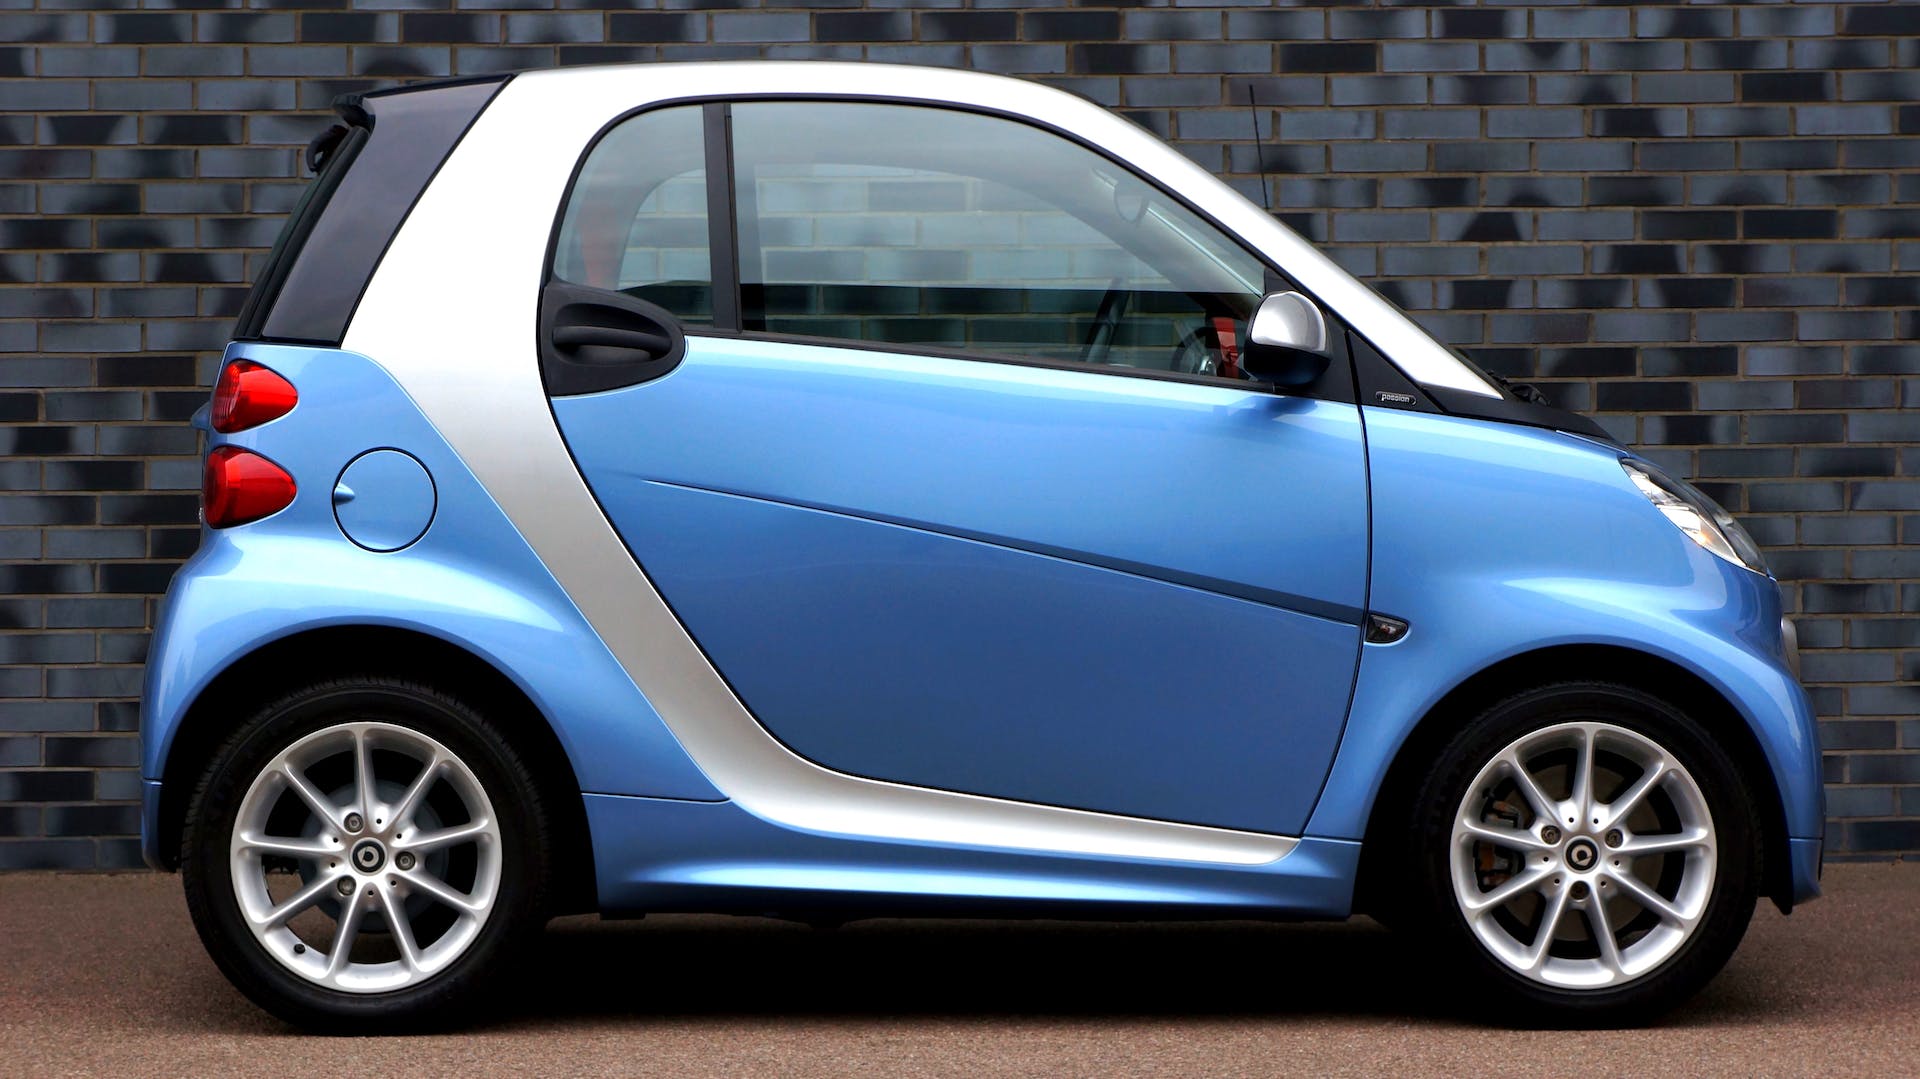 In 2020, the National Highway Traffic Safety Administration (NHTSA) released a Safety Recall Report on the Smart Fortwo. The report states that the Smart Fortwo may have issues with its electrical system.